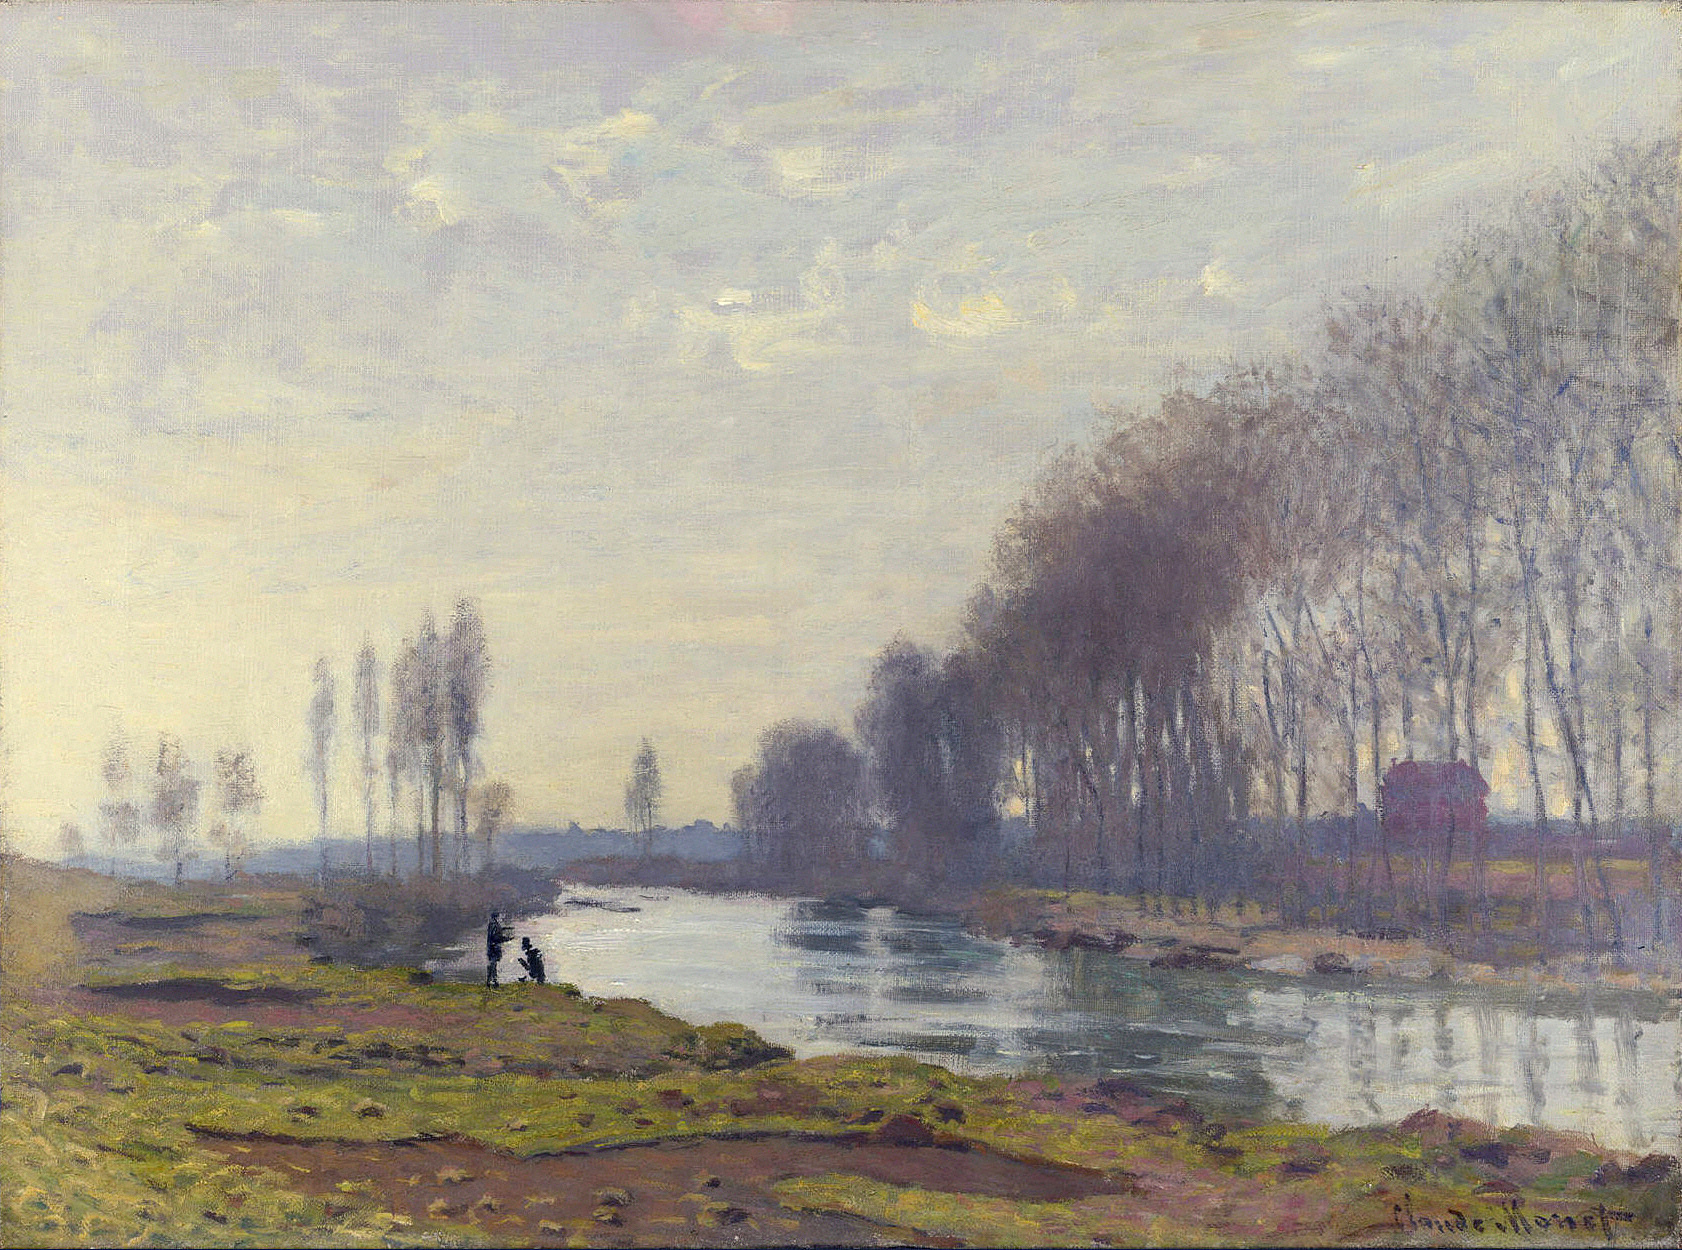 The Small Arm of the Seine at Argenteuil 1872